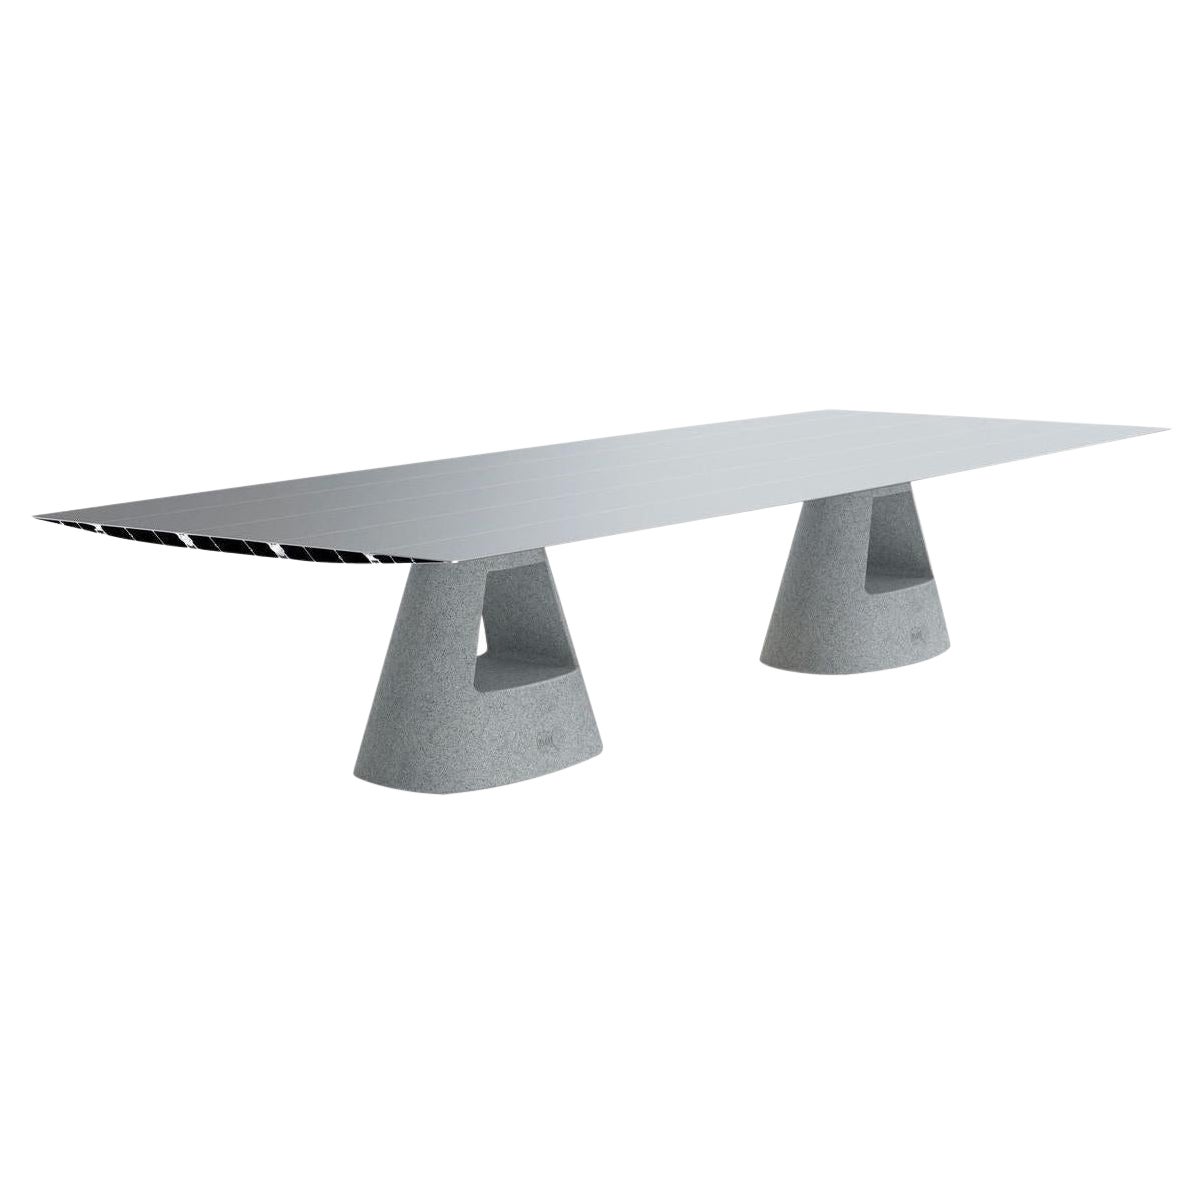 Big Concrete Table B by Konstantin Grcic For Sale